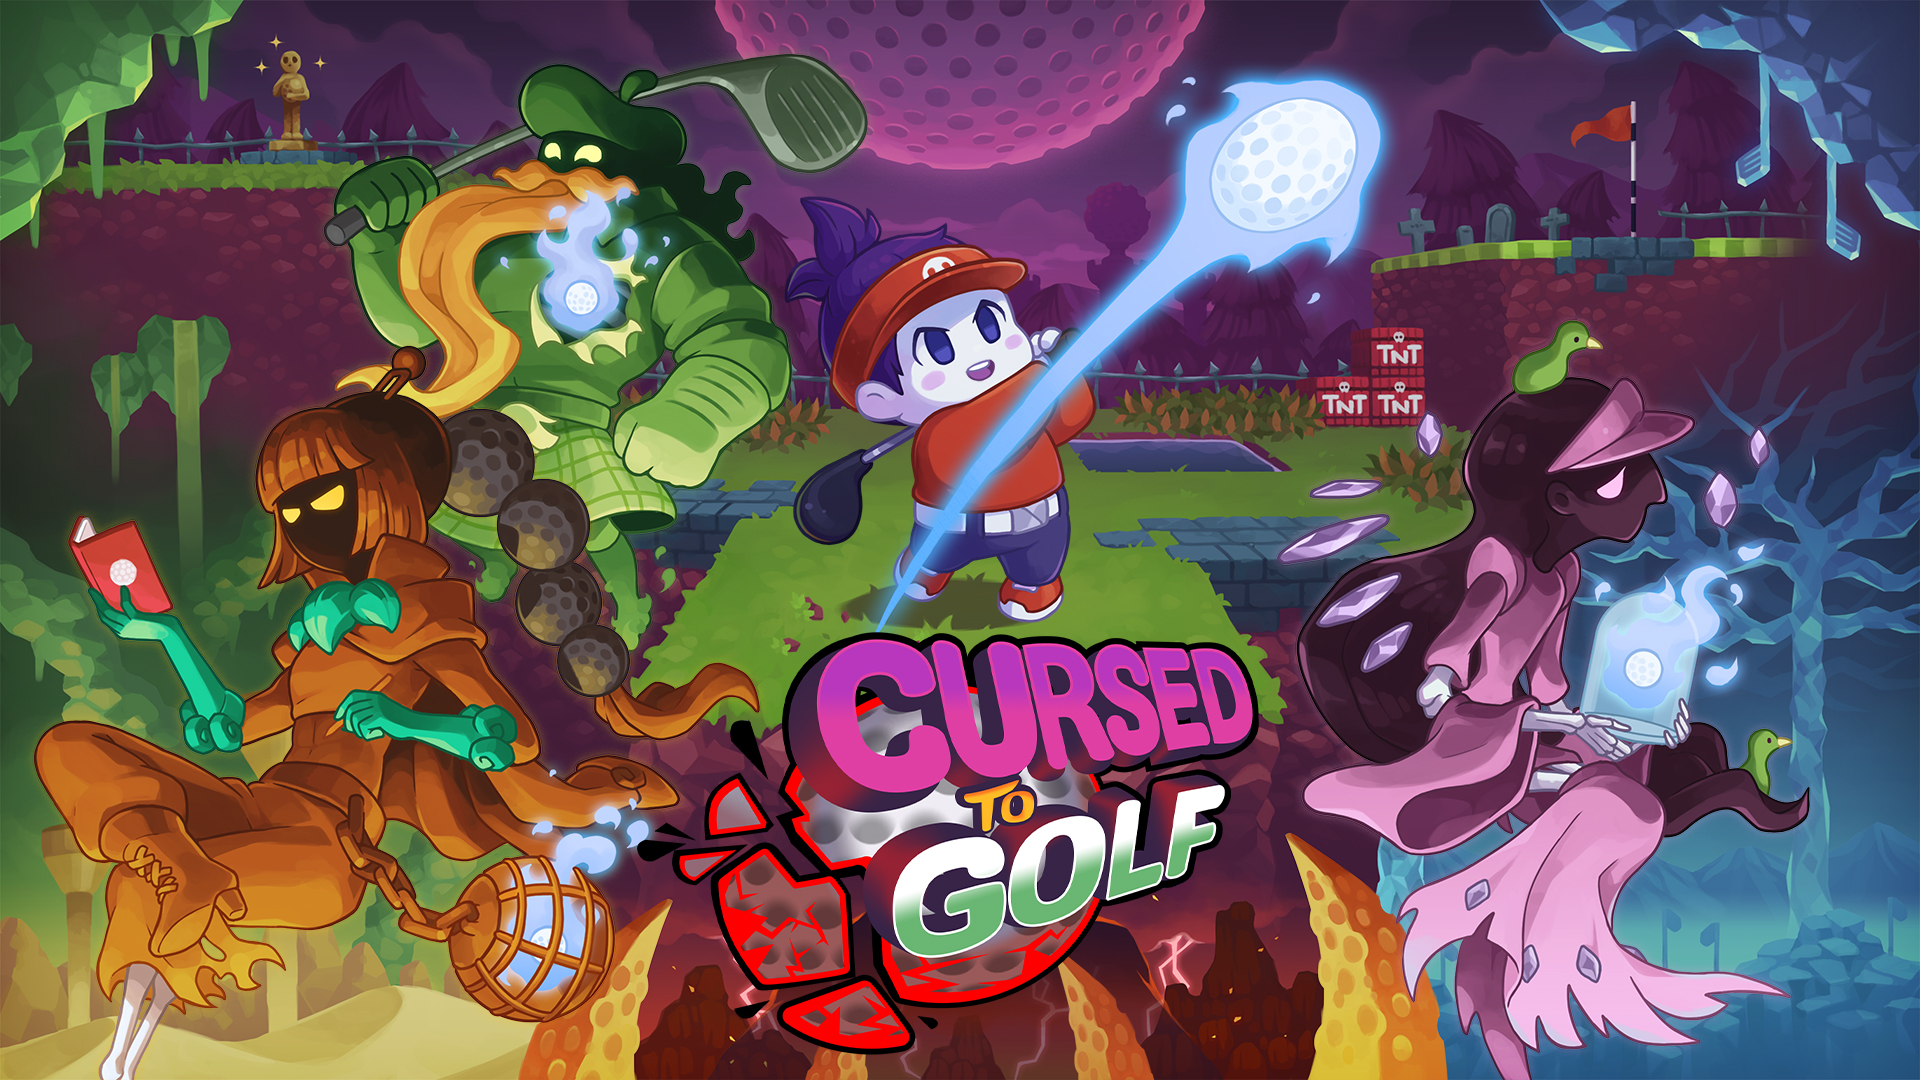 Cursed to Golf will be ON MY SWITCH ON AUGUST 18TH